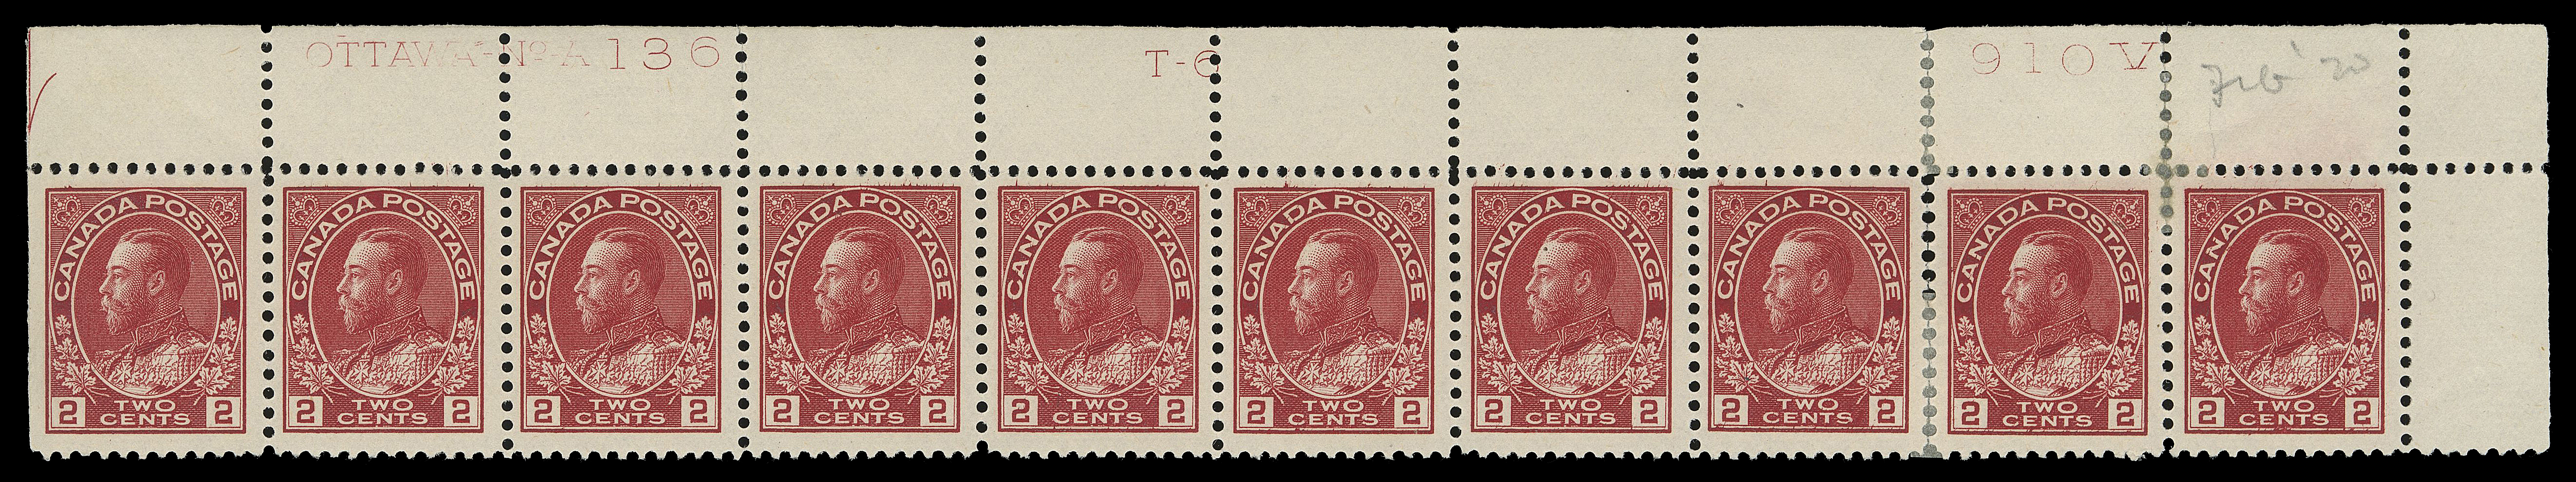 ADMIRAL STAMPS  106, 106iii,Three strips of ten with consecutive plate numbers, UL Plate 134 in dark shade, UR Plate 135, UR Plate 136, last two with split perfs supported by hinges between last two and three stamps respectively, other 25 stamps are NH, VF (Unitrade cat. $3,200)